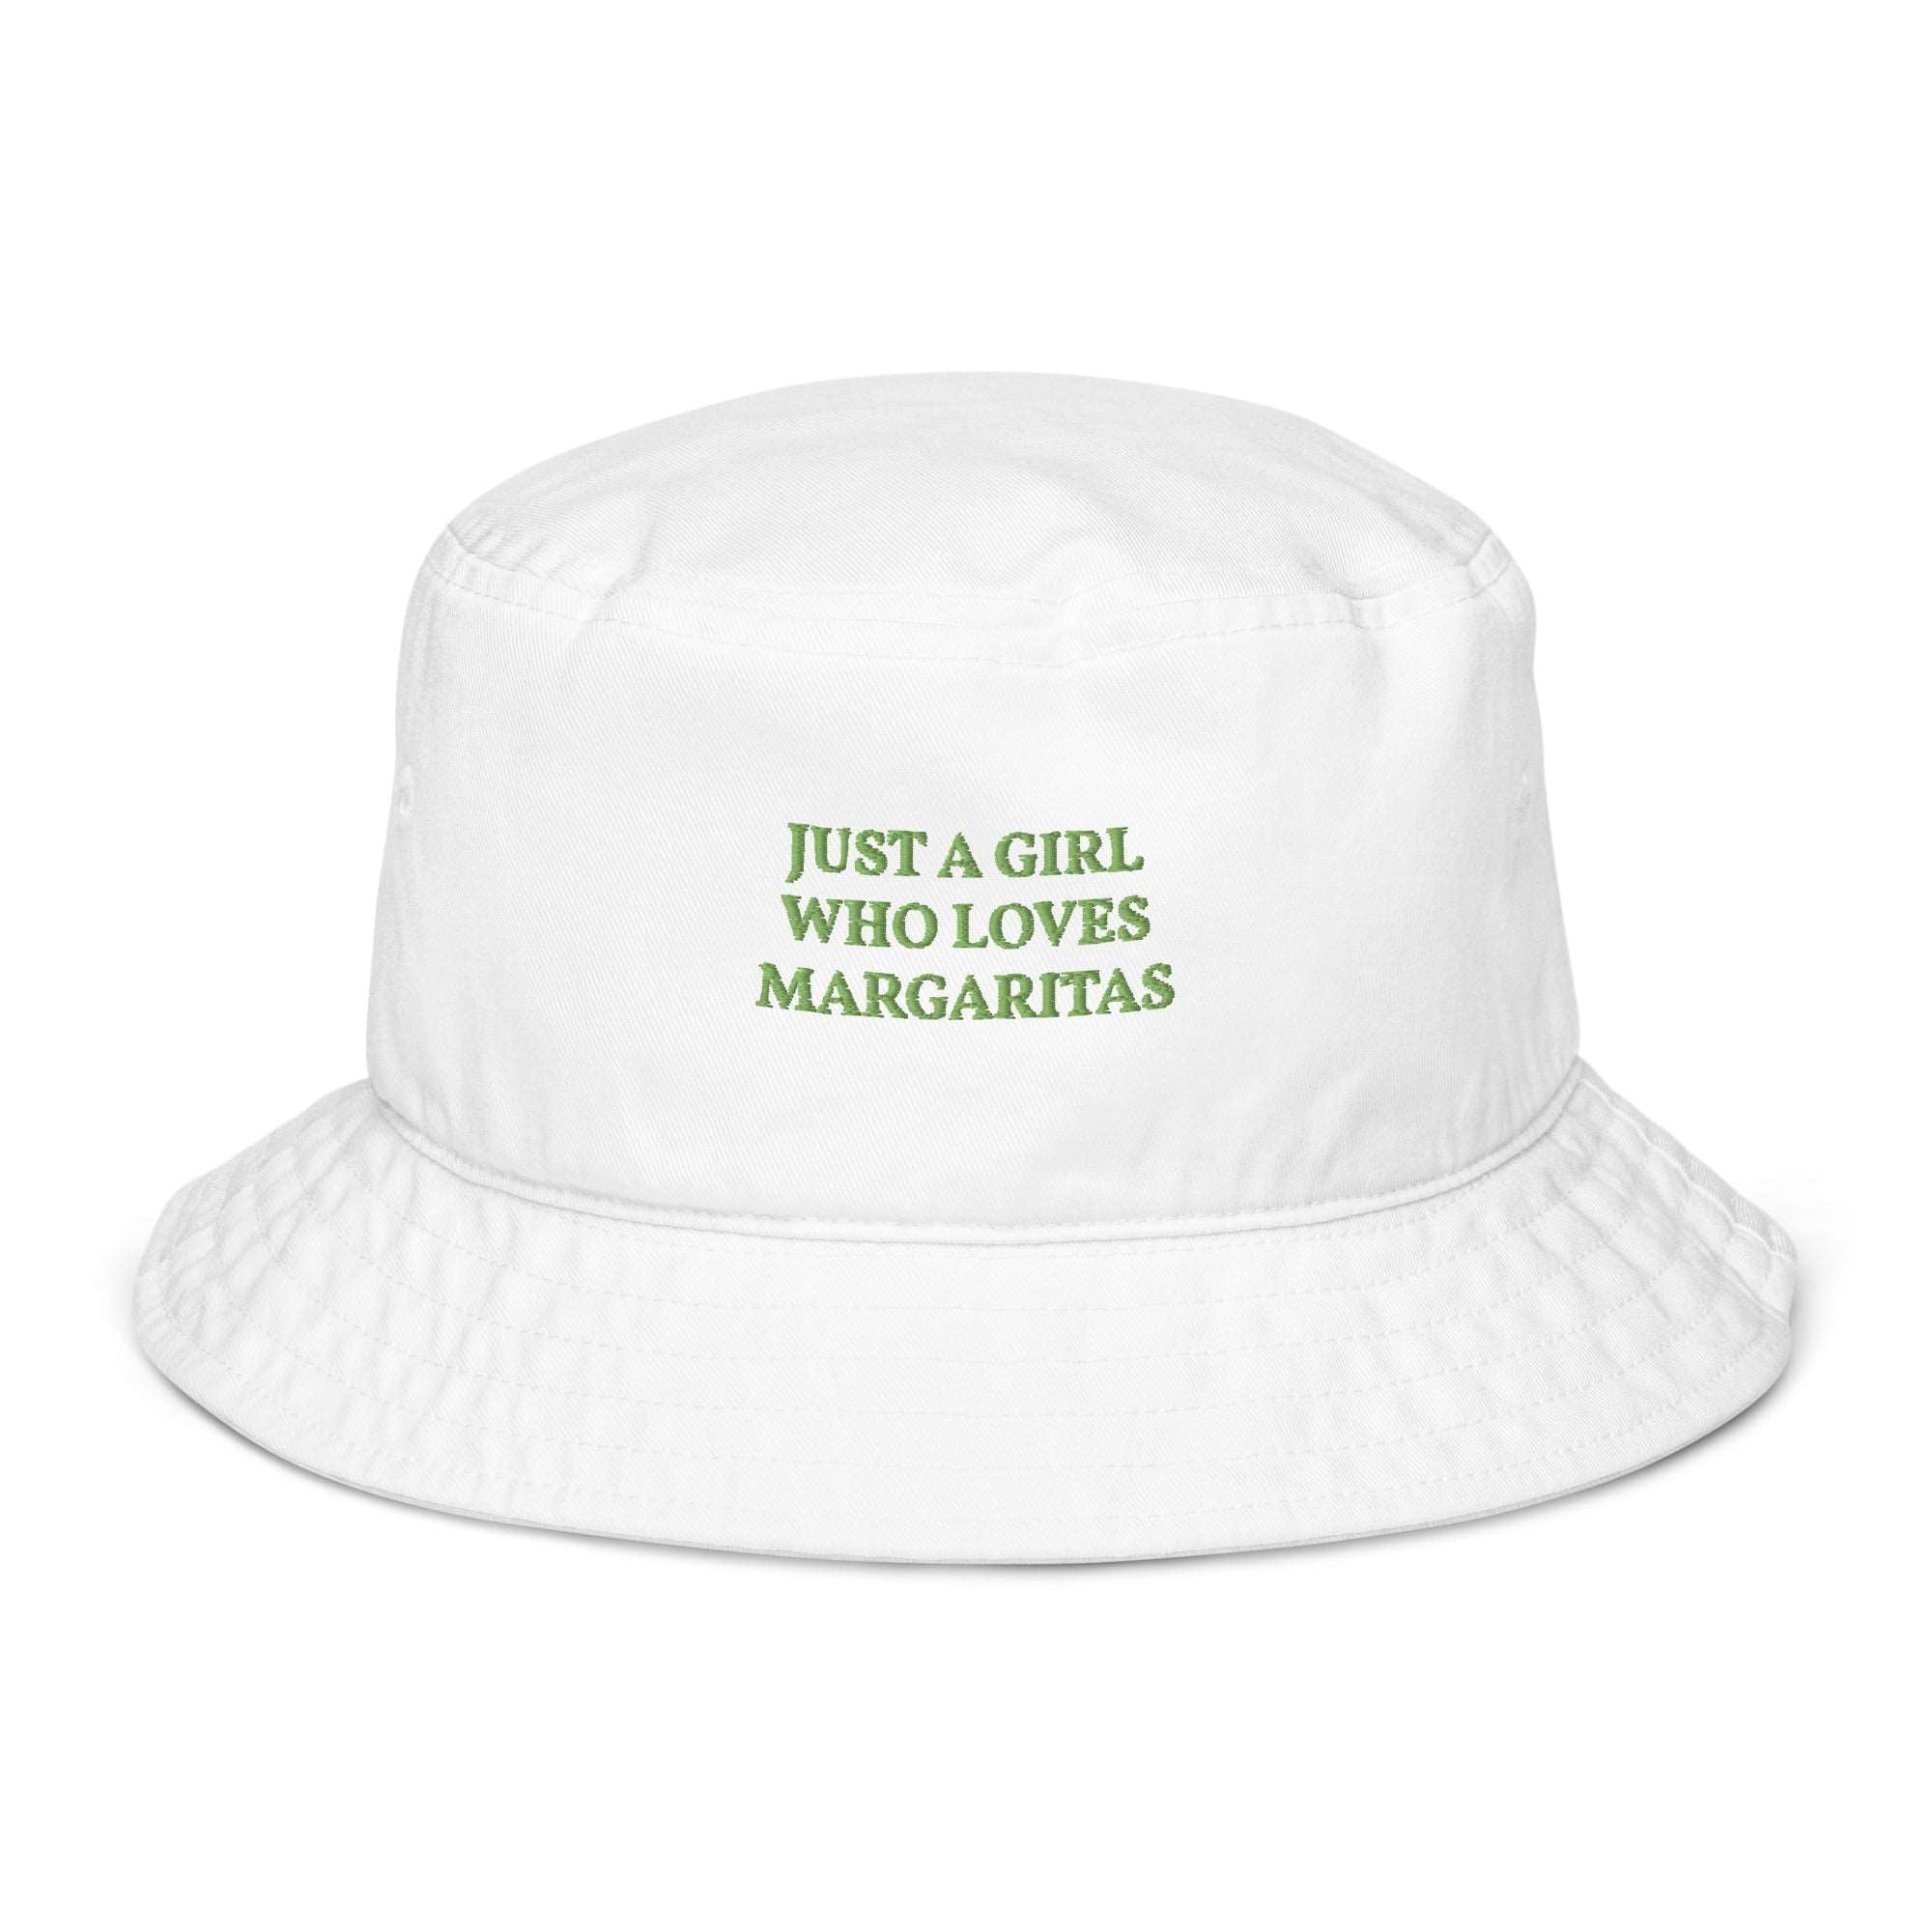 Just a Girl who loves Margaritas - Organic Embroidered Bucket Hat - The Refined Spirit